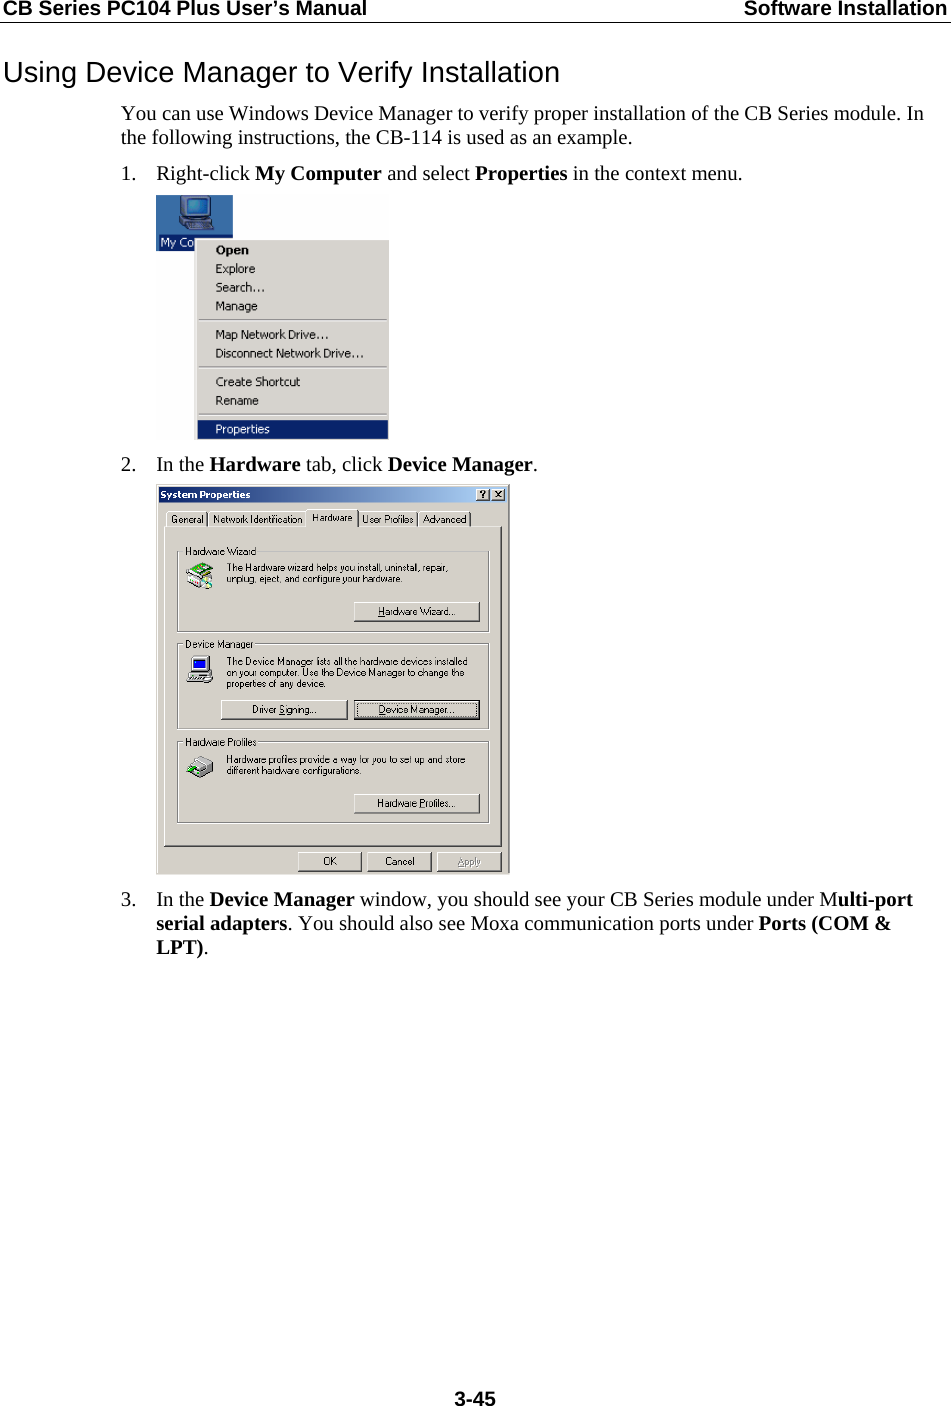 CB Series PC104 Plus User’s Manual  Software Installation Using Device Manager to Verify Installation You can use Windows Device Manager to verify proper installation of the CB Series module. In the following instructions, the CB-114 is used as an example. 1. Right-click My Computer and select Properties in the context menu.  2. In the Hardware tab, click Device Manager.  3. In the Device Manager window, you should see your CB Series module under Multi-port serial adapters. You should also see Moxa communication ports under Ports (COM &amp; LPT).  3-45